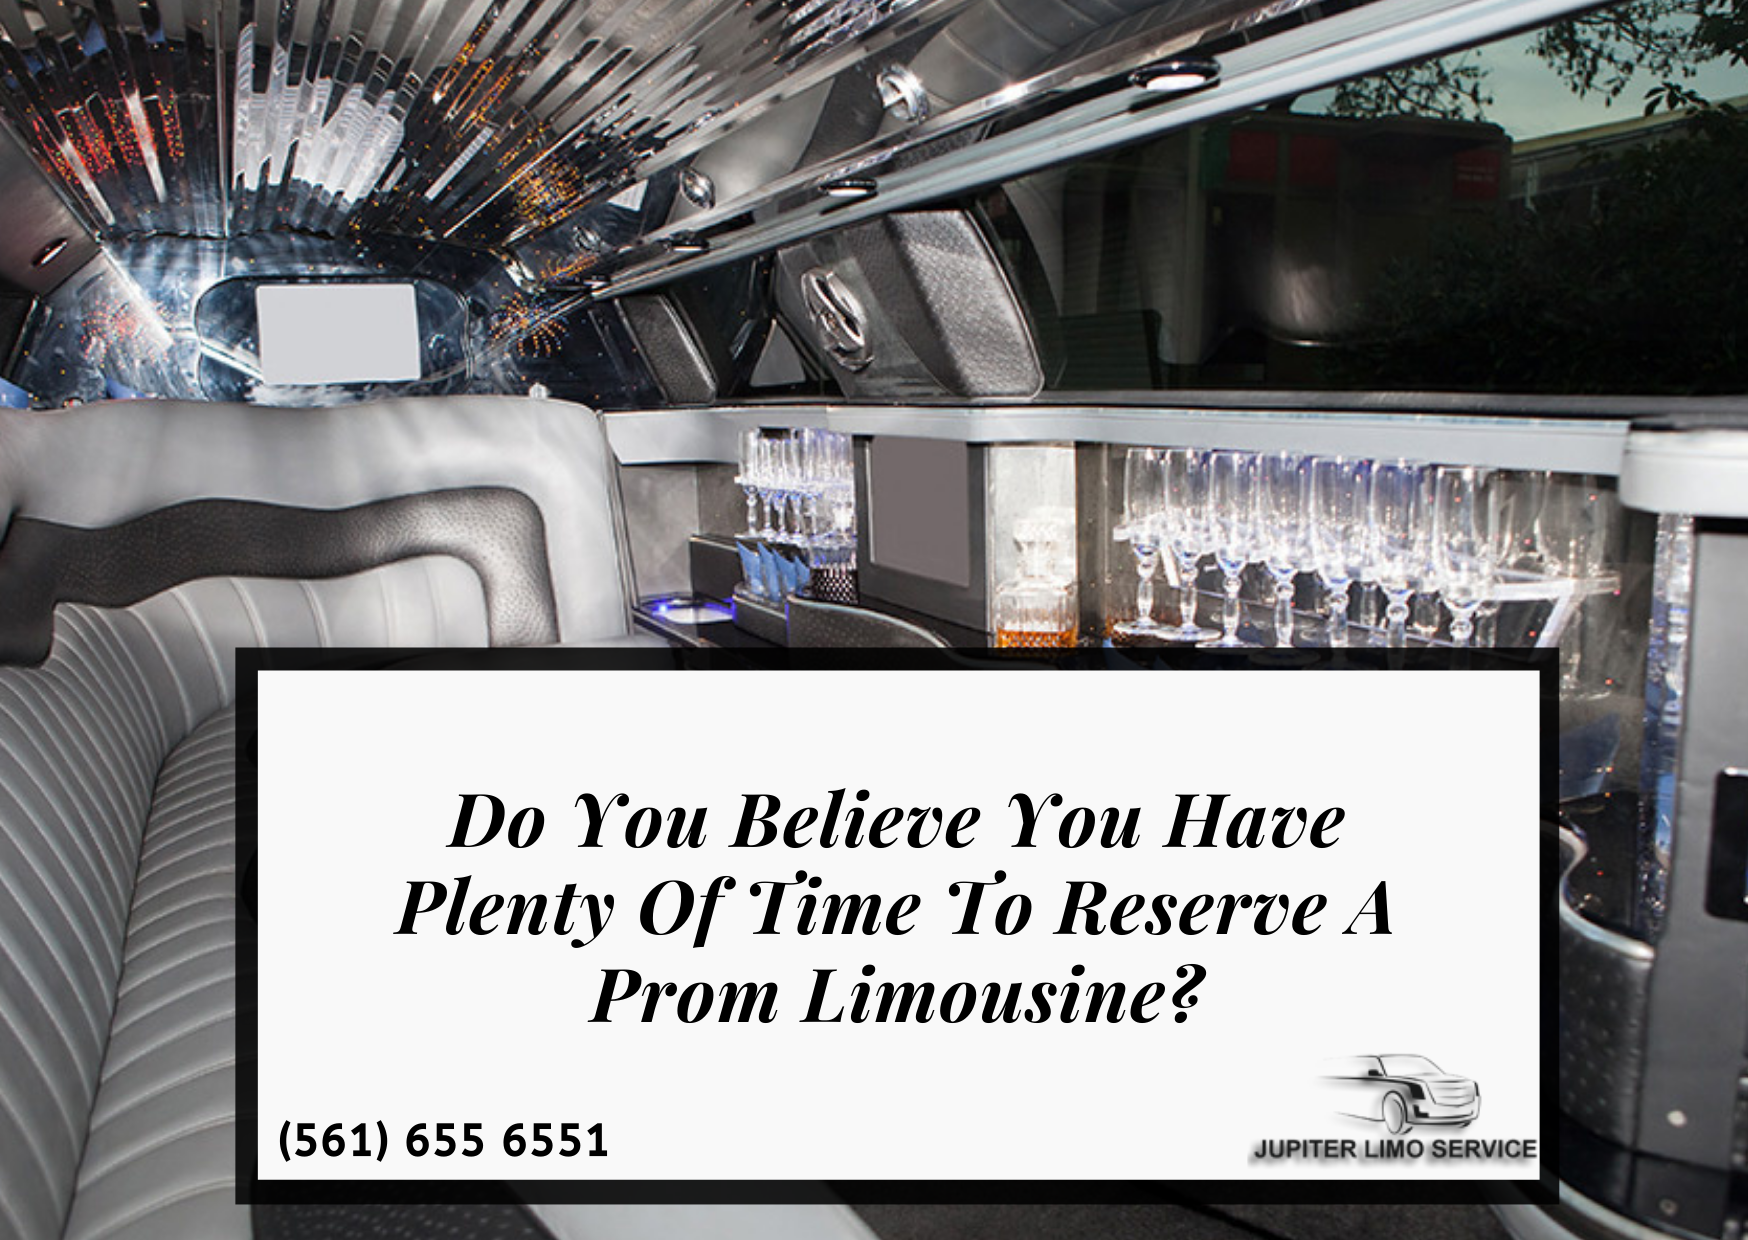 Do You Believe You Have Plenty Of Time To Reserve A Prom Limousine?